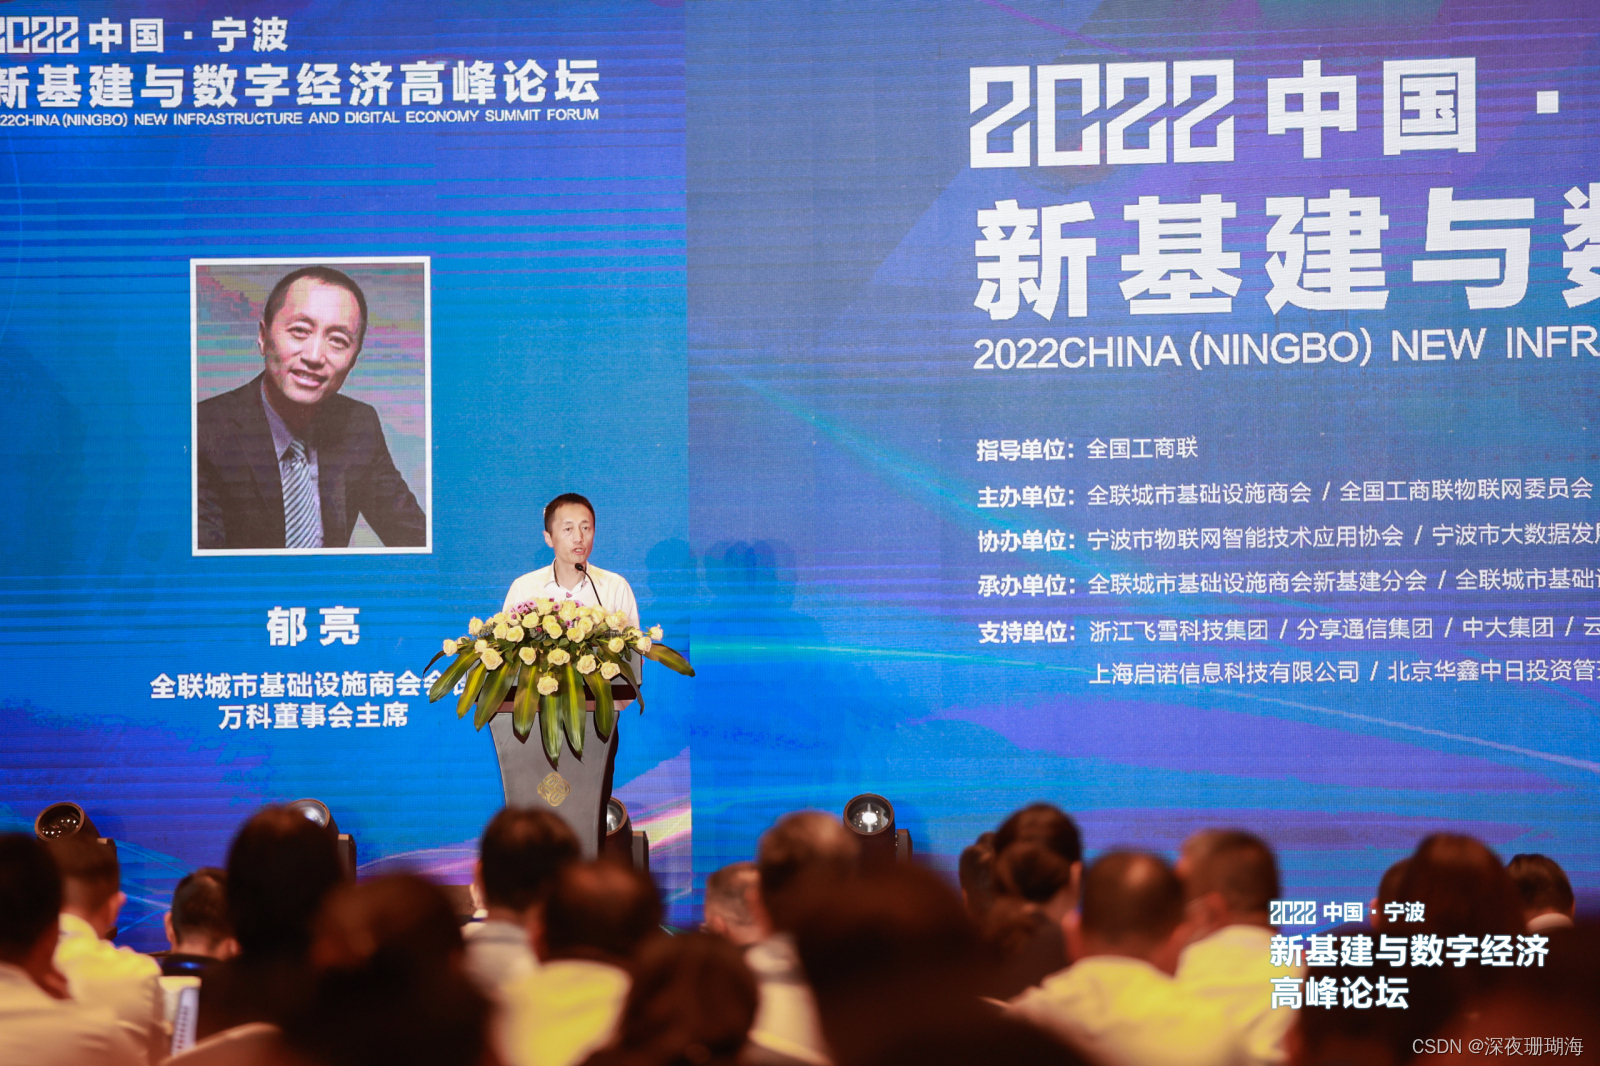 Yu Liang, President of All-China Urban Infrastructure Chamber of Commerce and Chairman of the Board of Directors of Vanke